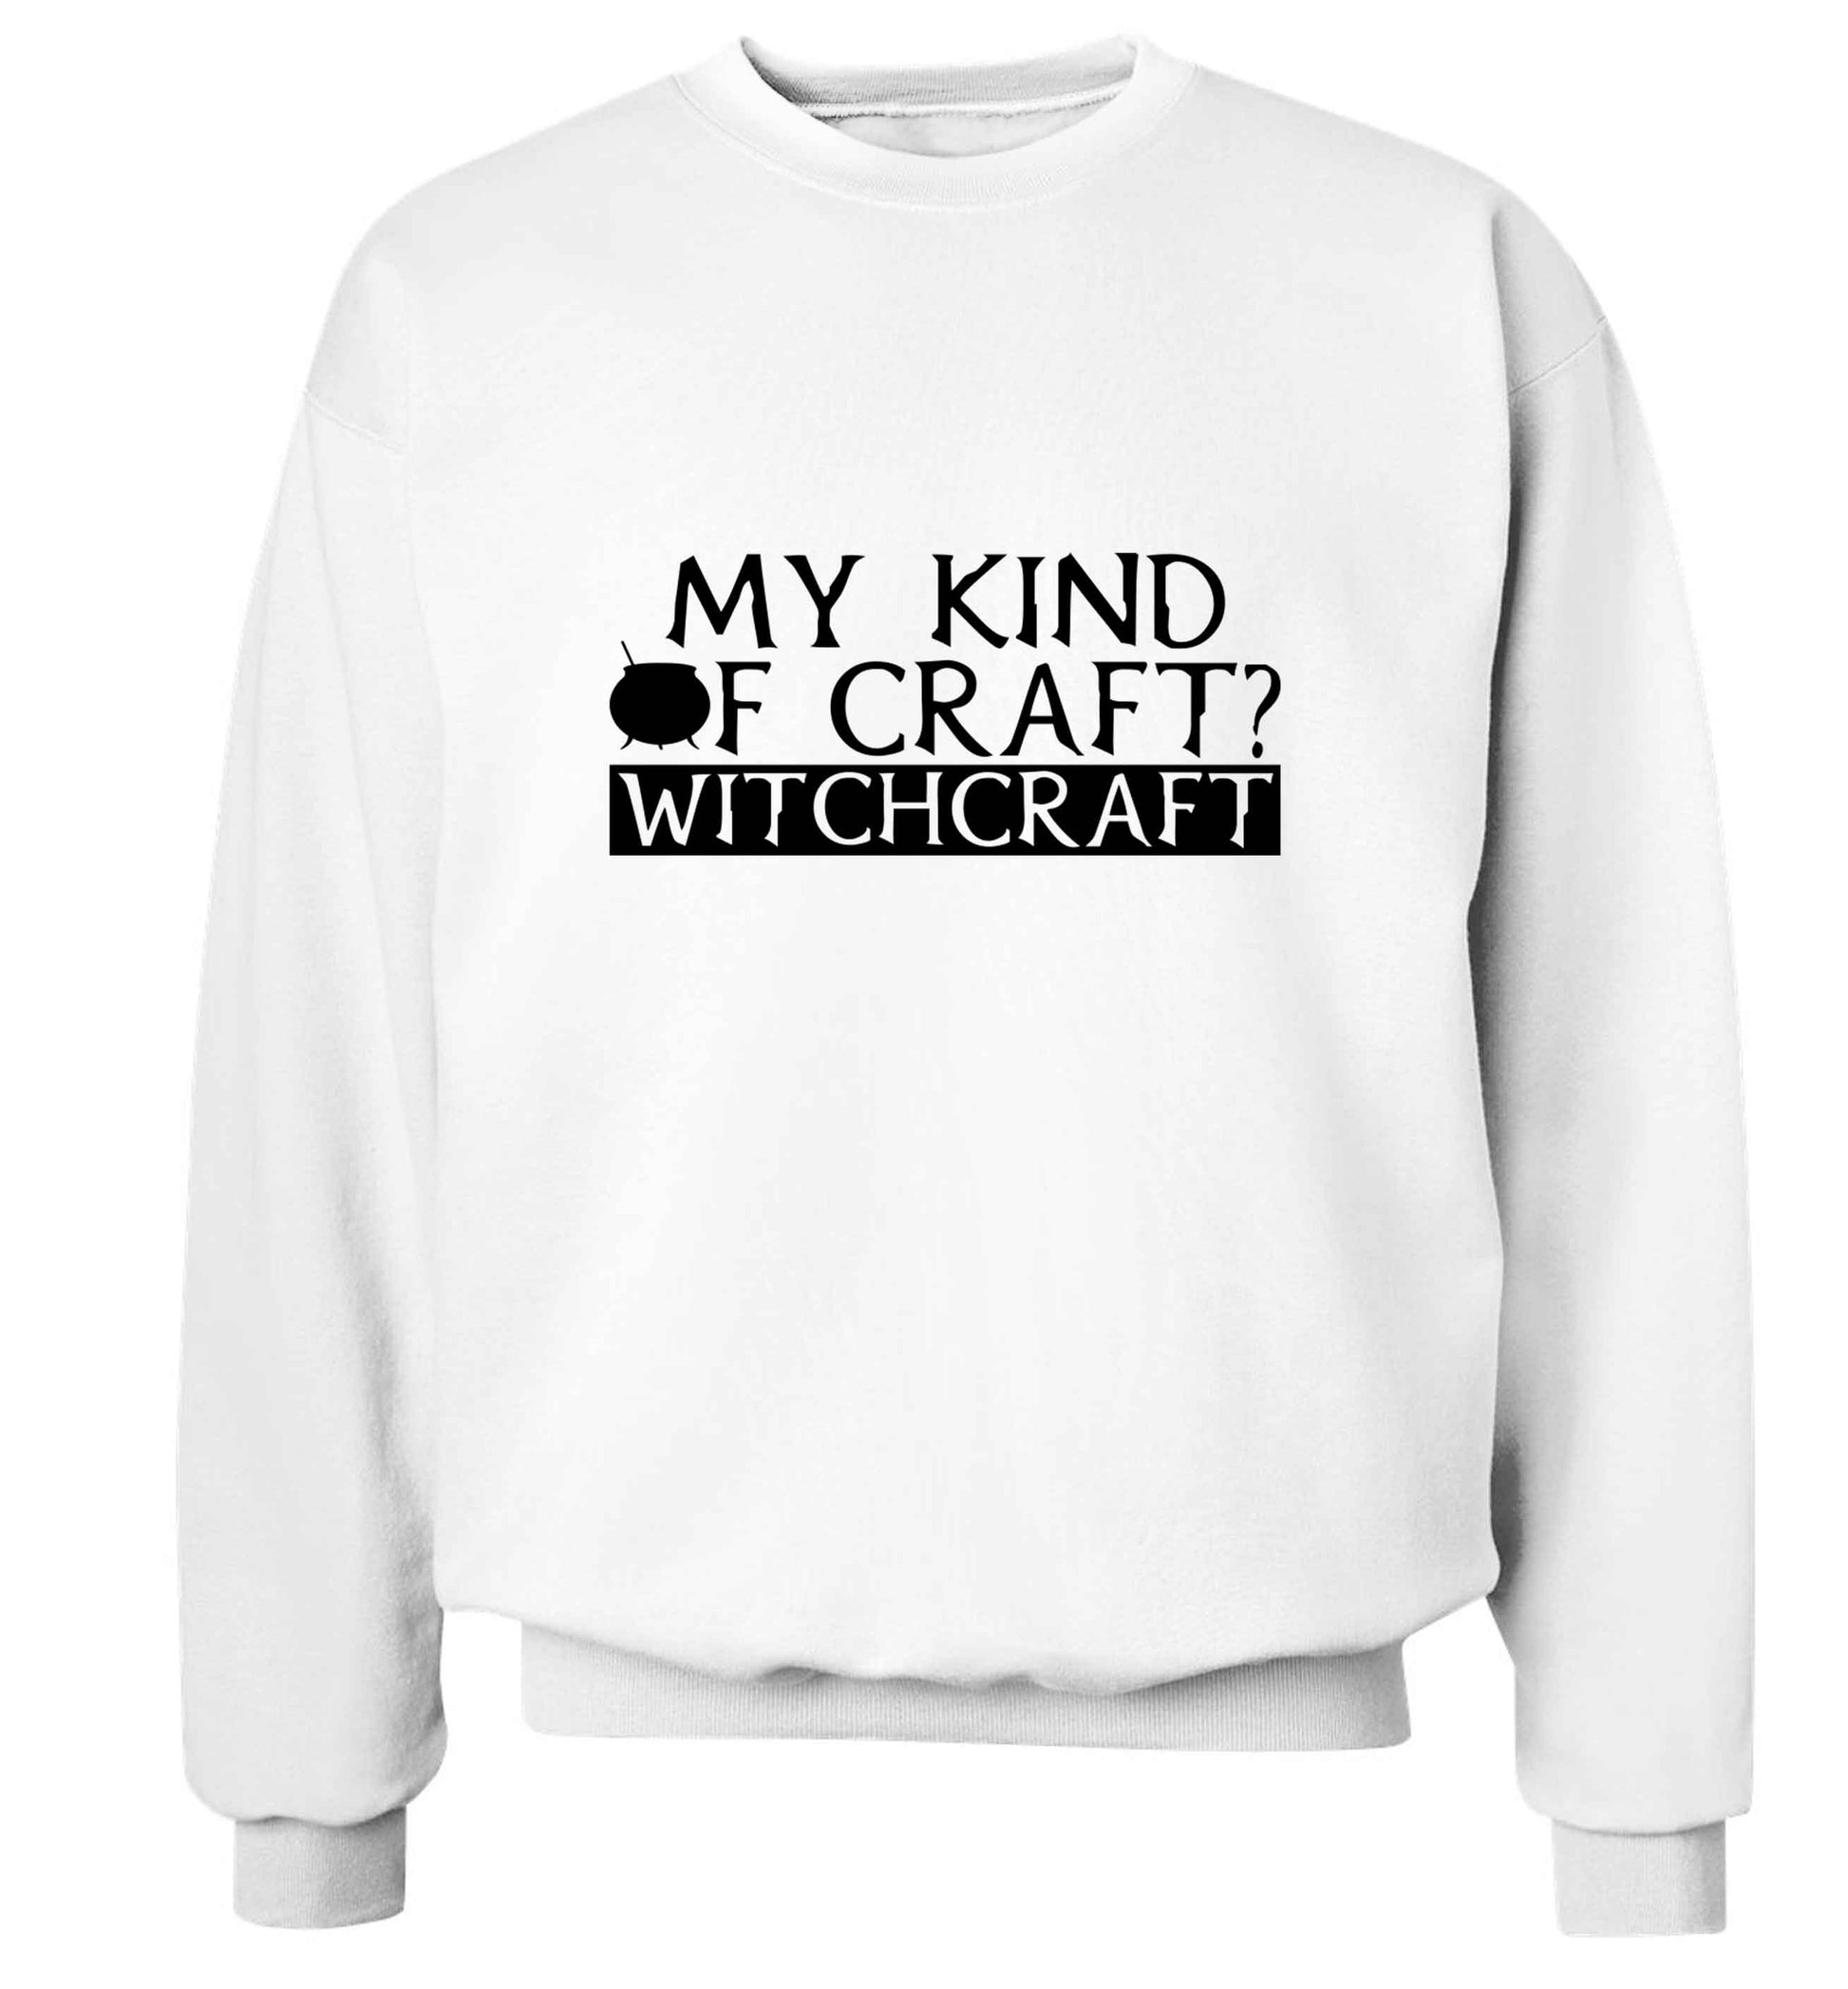 My king of craft? witchcraft  adult's unisex white sweater 2XL